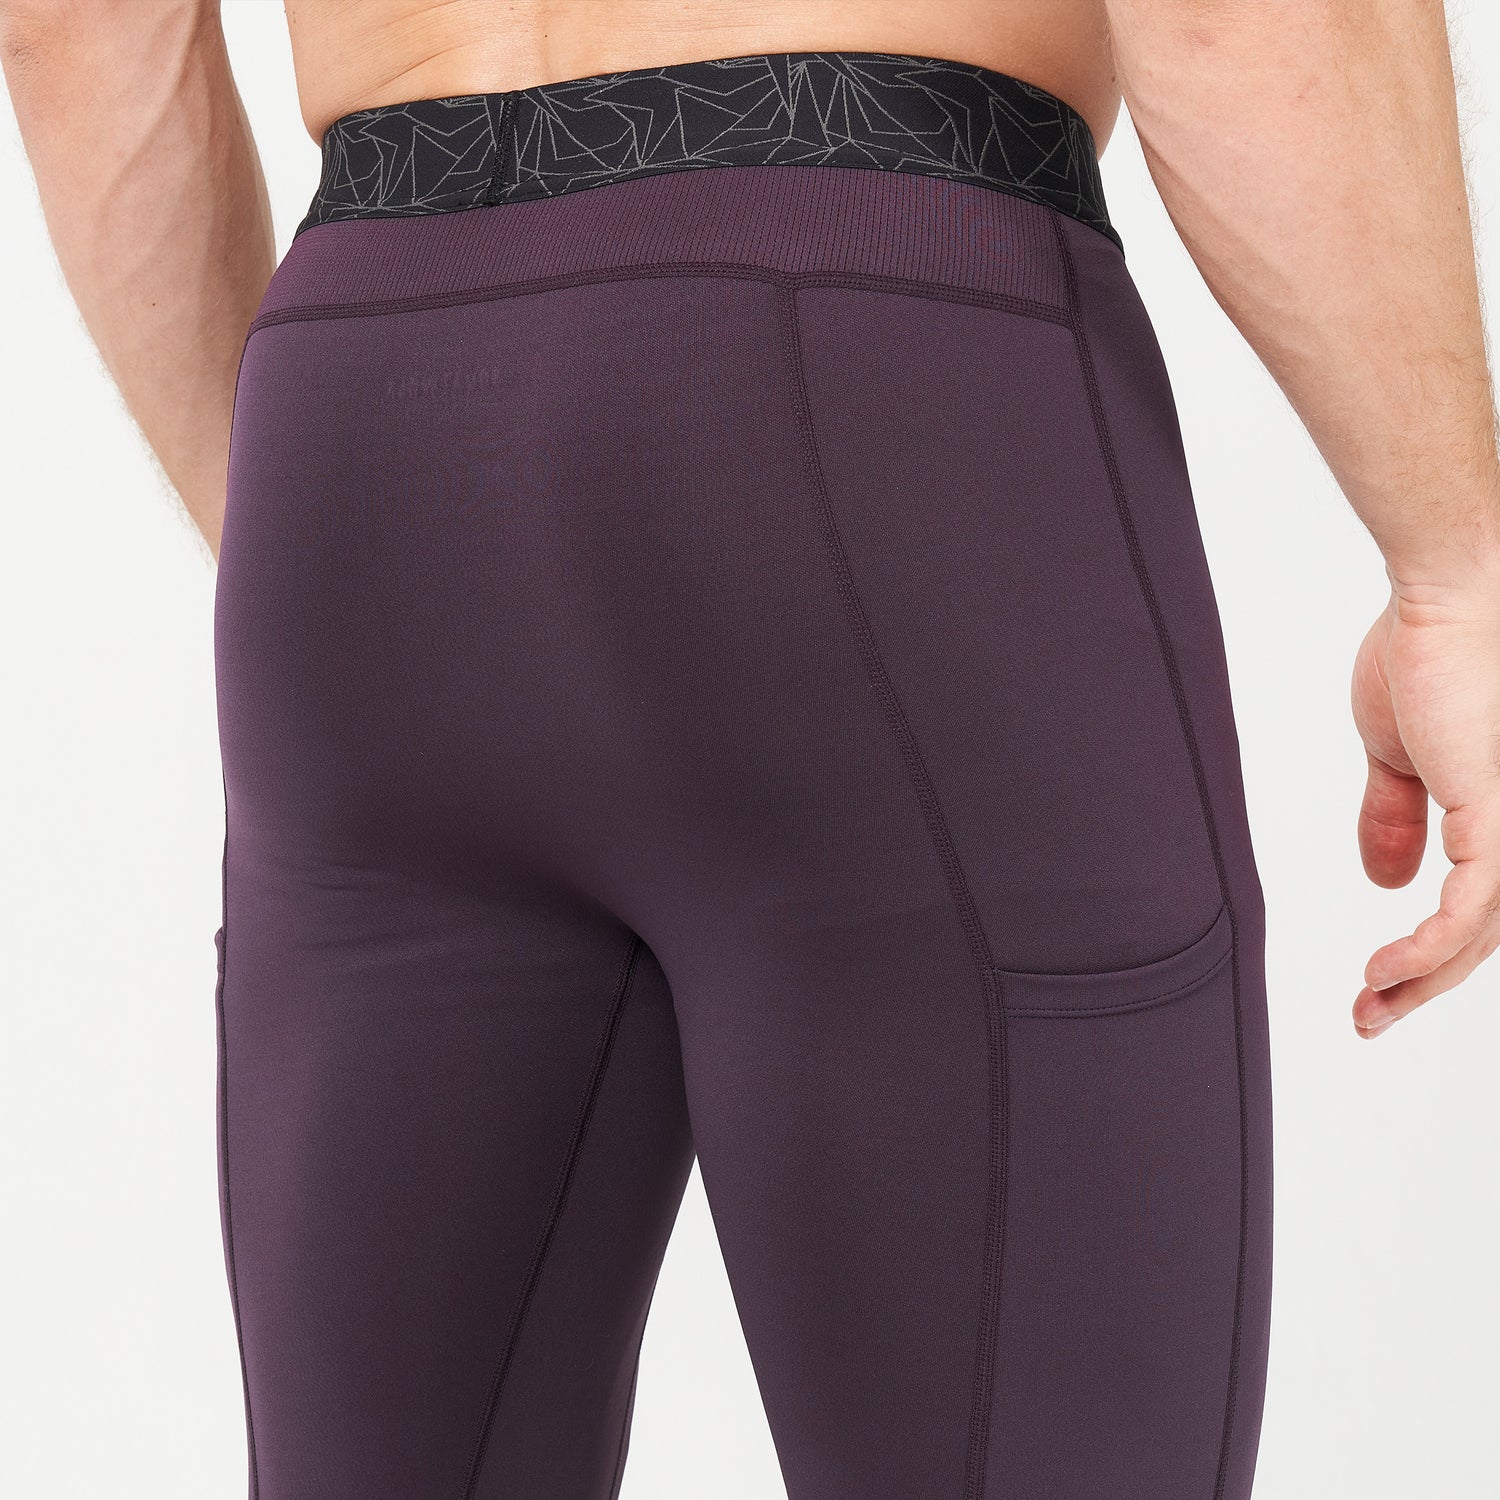 squatwolf-gym-wear-lab360-tdry-gym-tights-plum-perfect-workout-tights-for-men